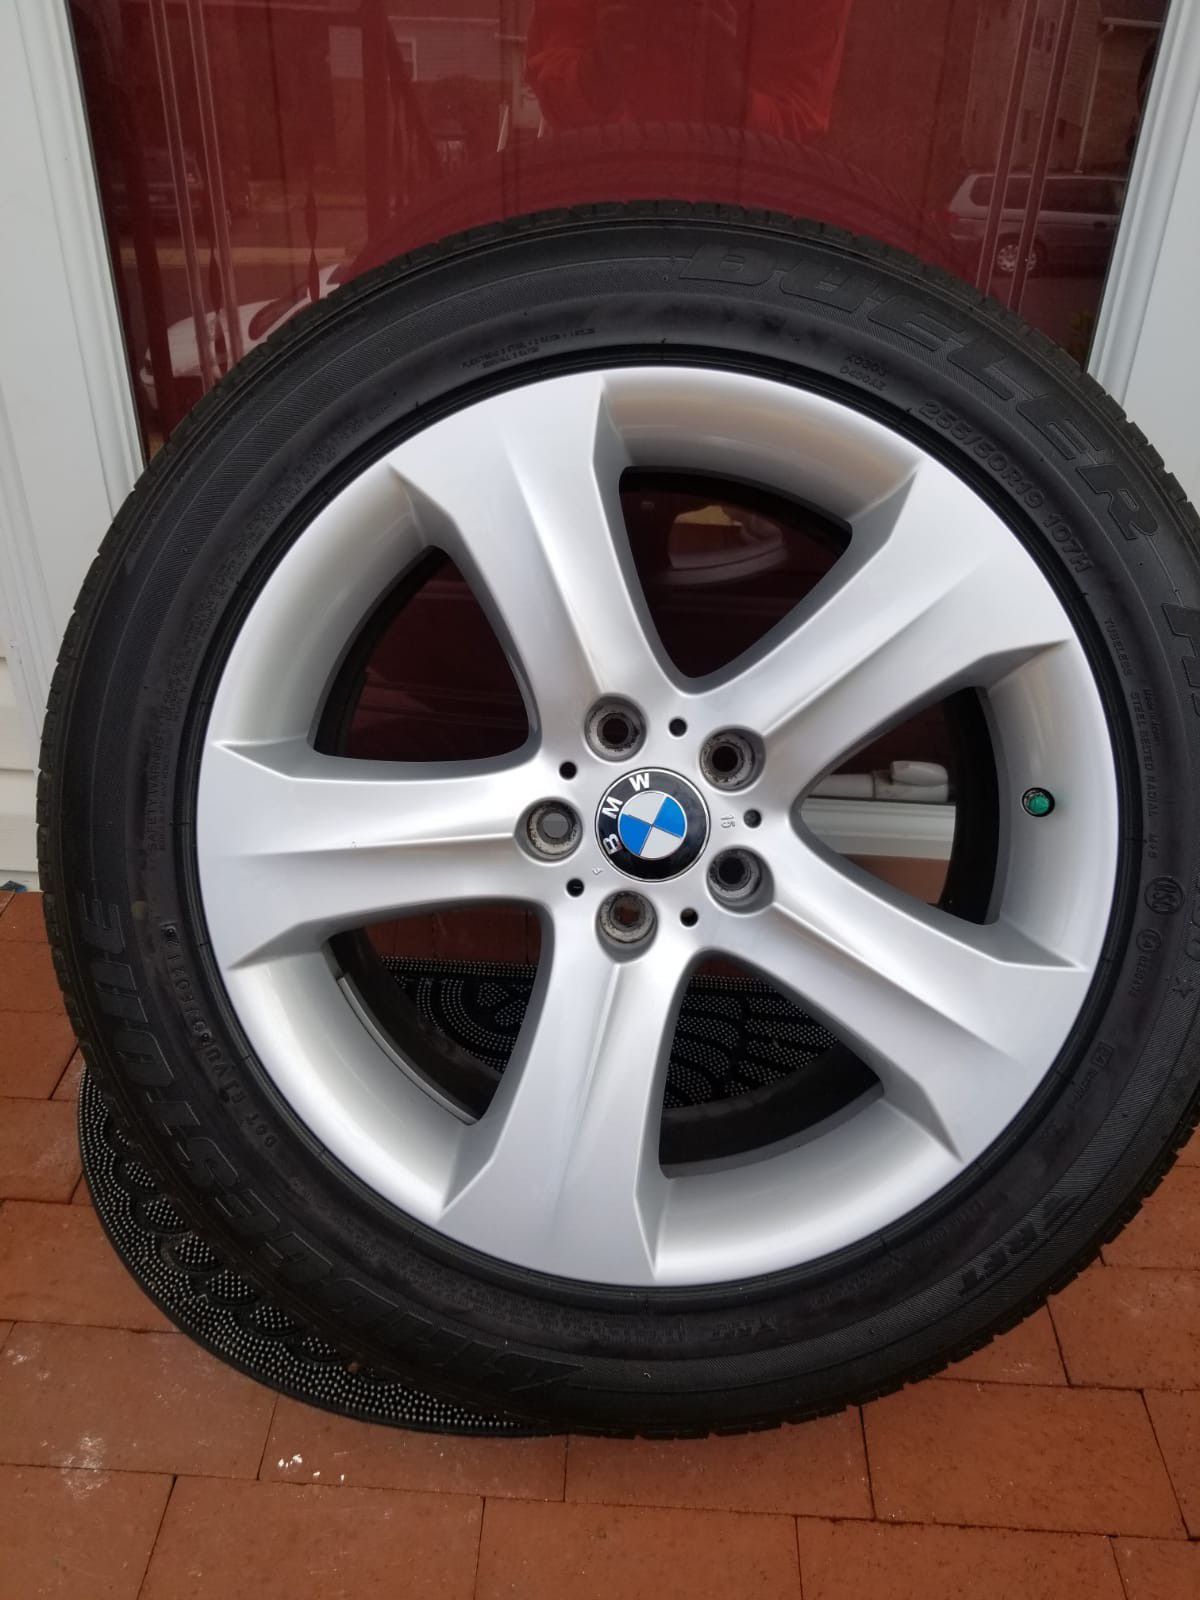 BMW - X6 , 4 Rim's and tires